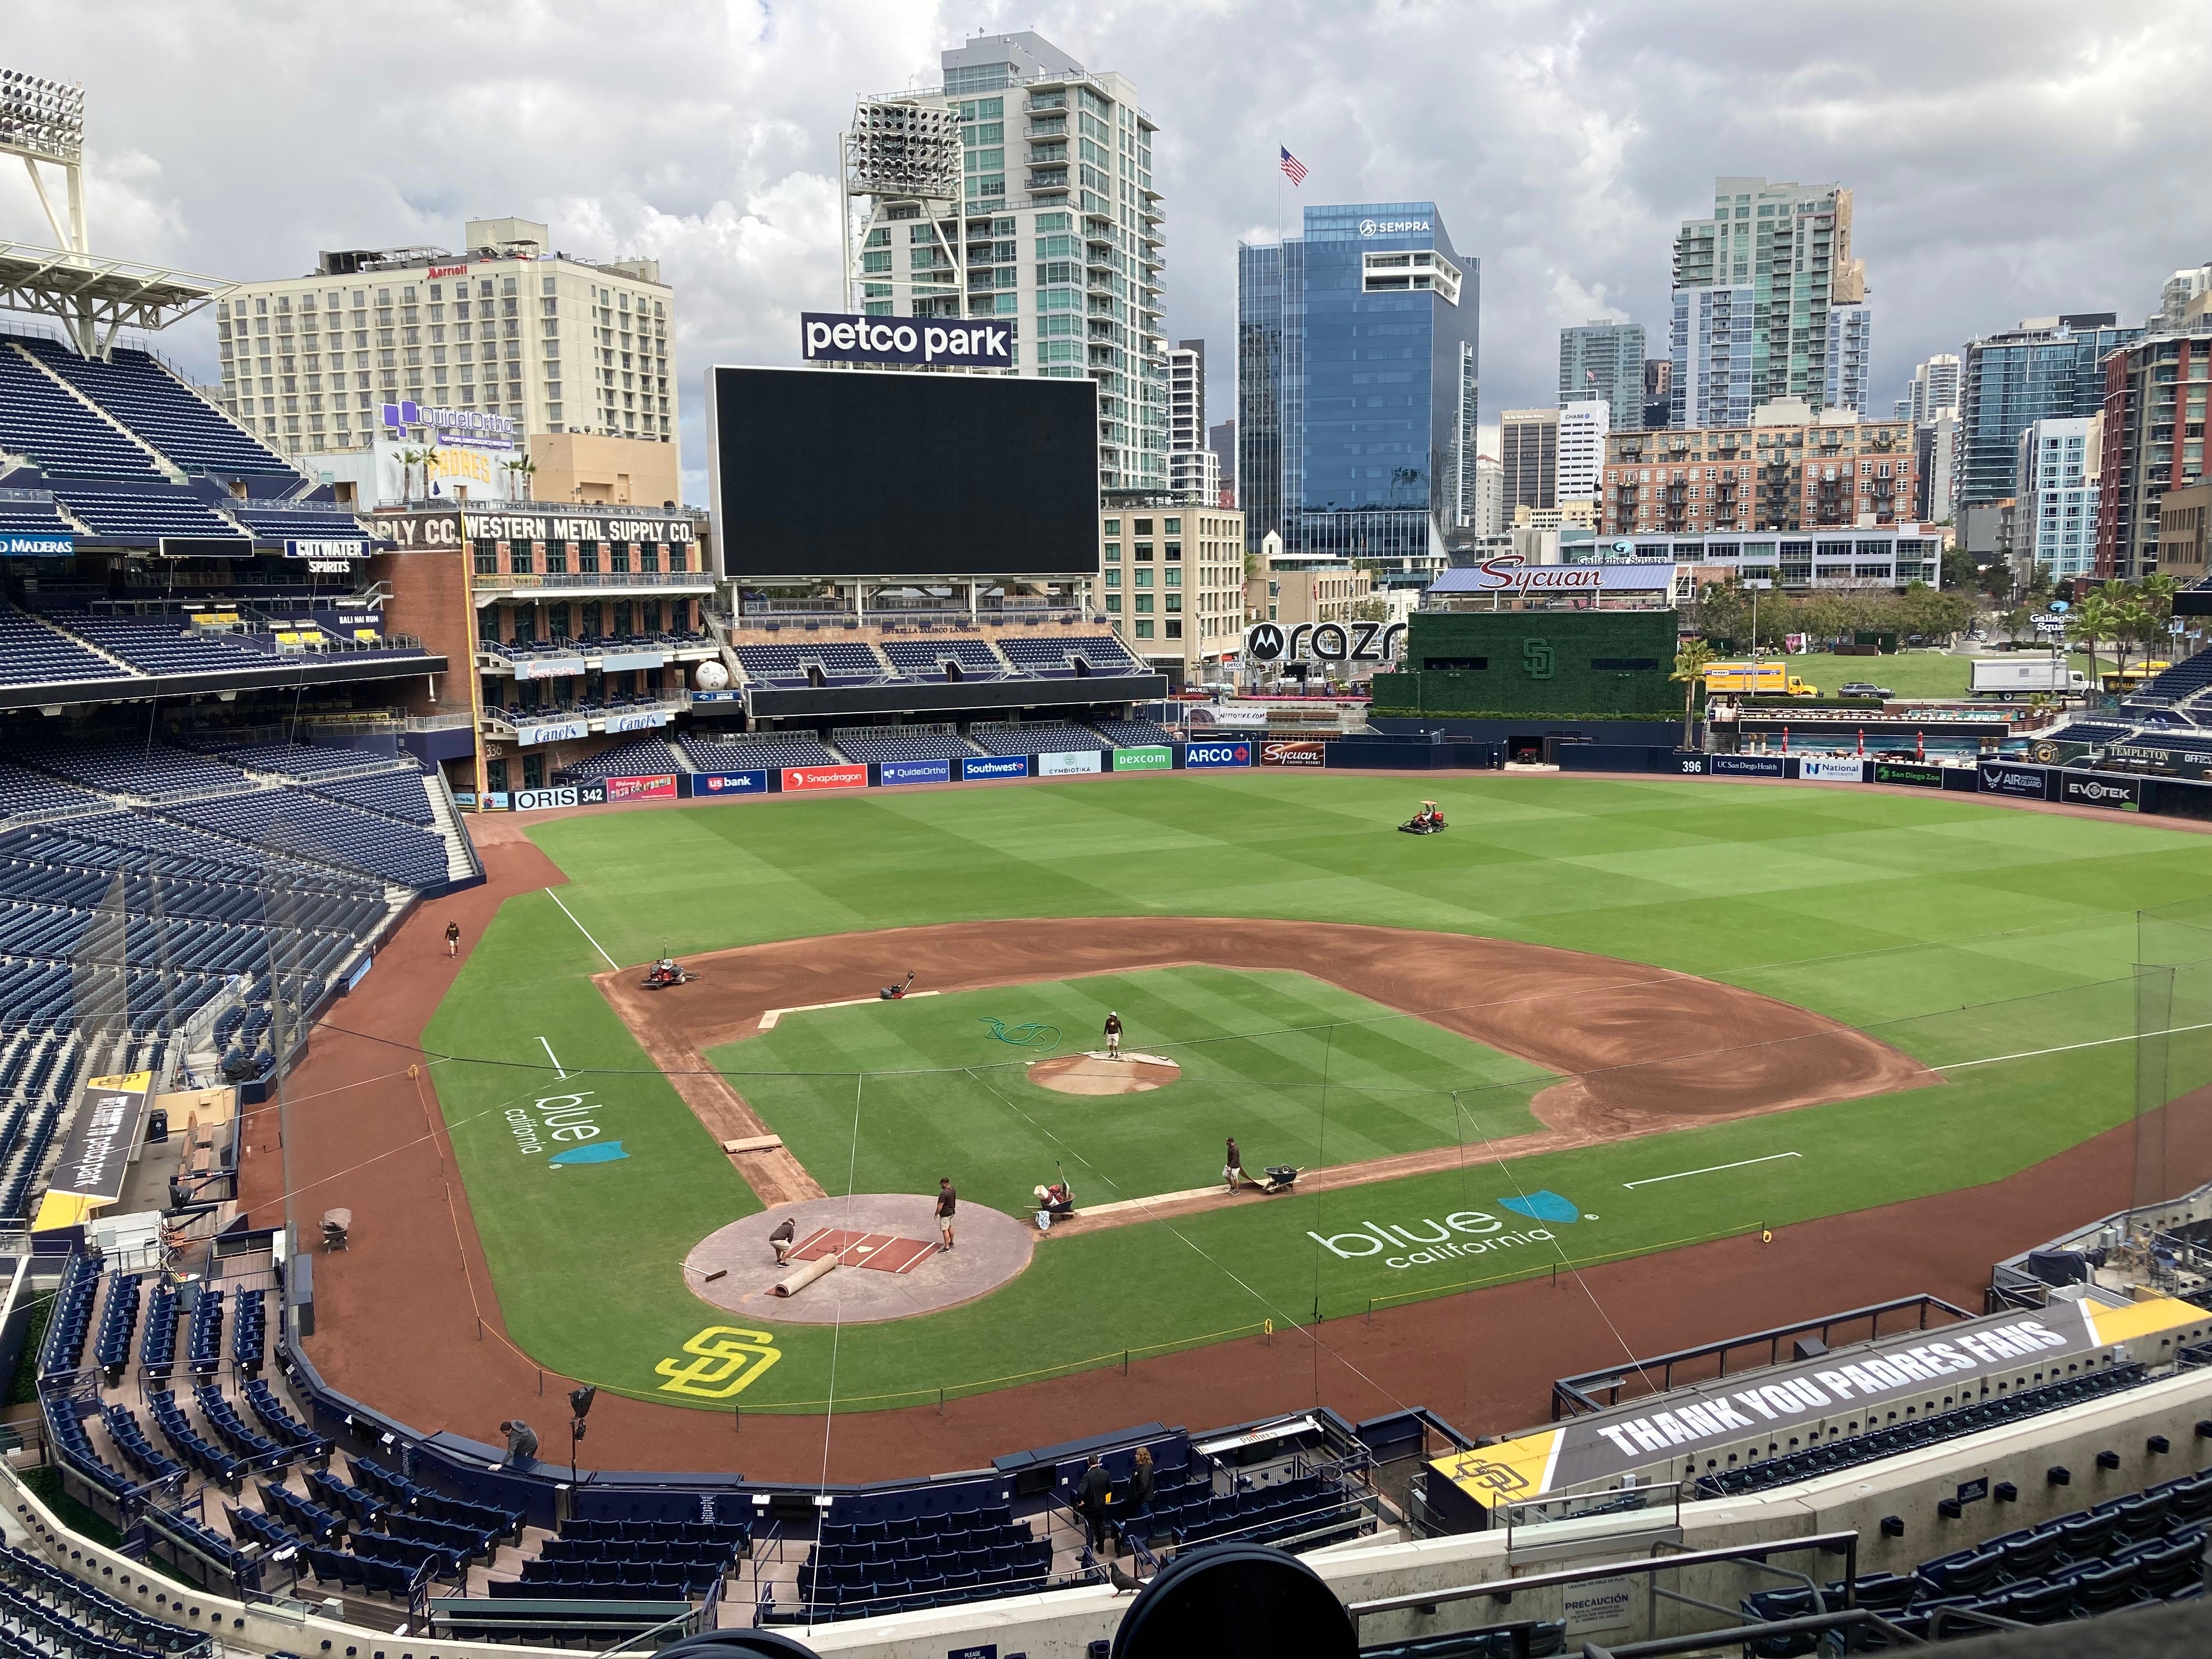 2021 San Diego Padres: Some moments to remember (and forget) from